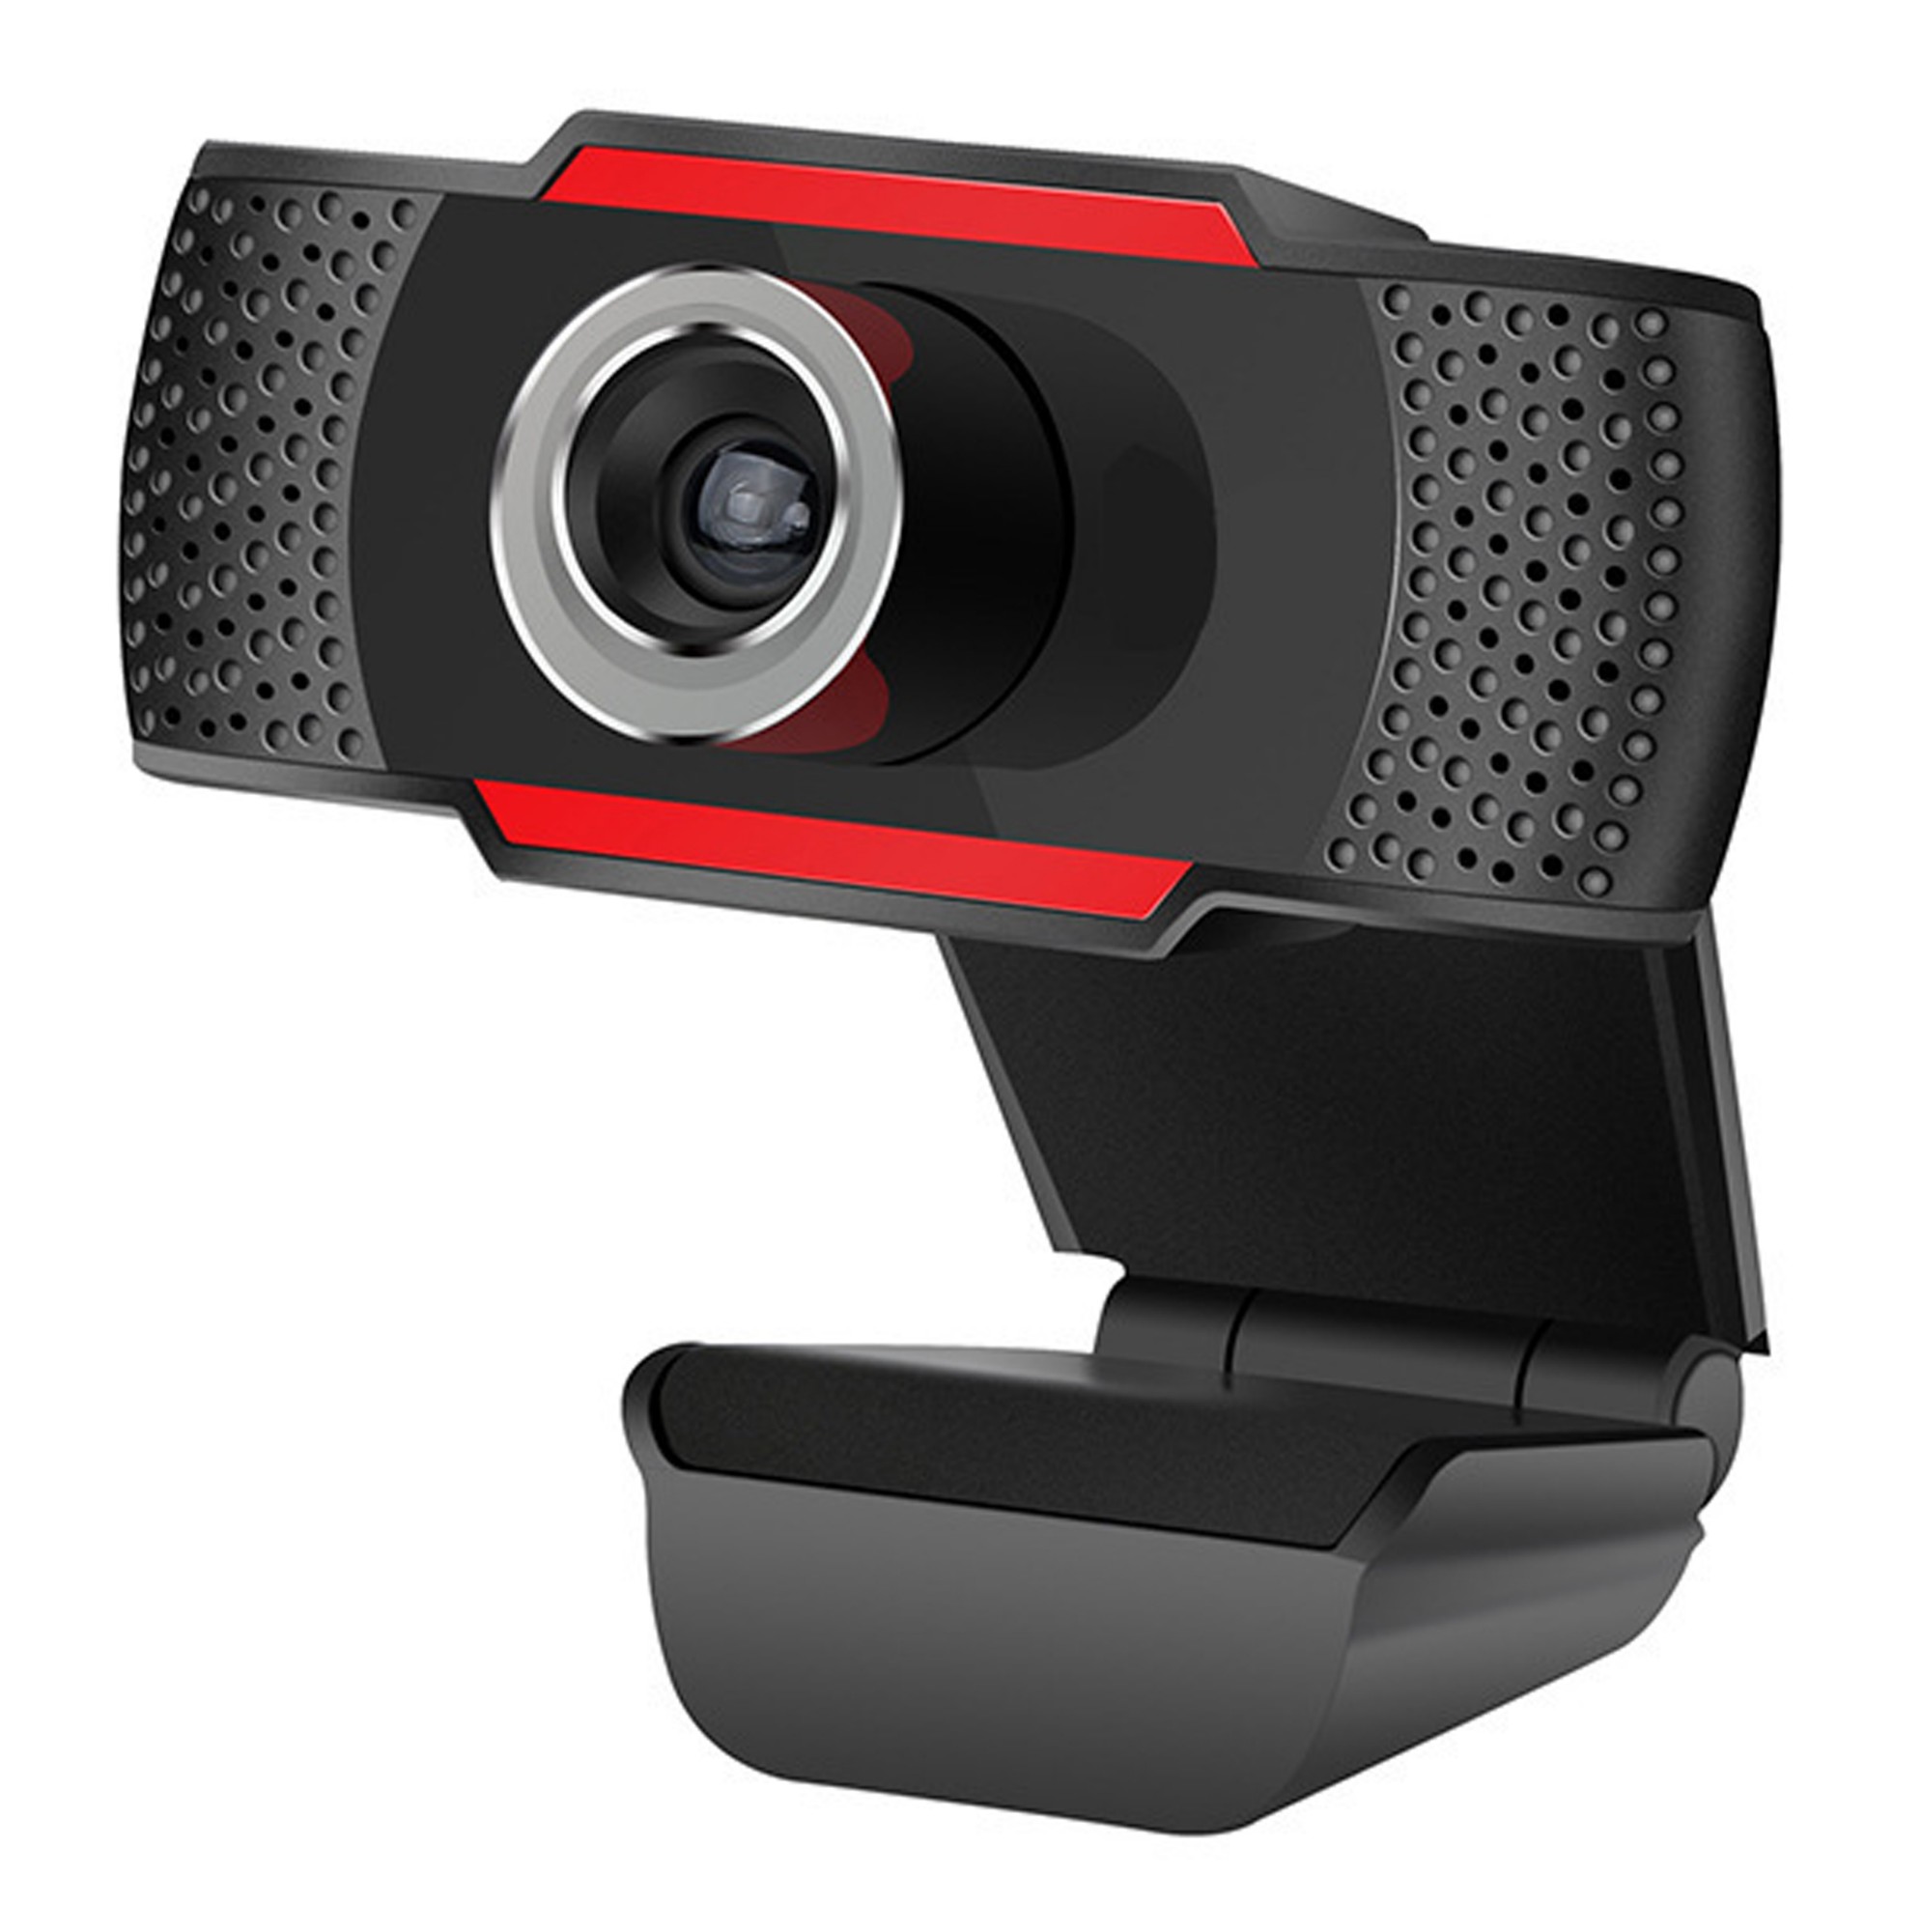 PCWC480 DARK MAILER WEBCAM 480P WITH MICROPHONE-